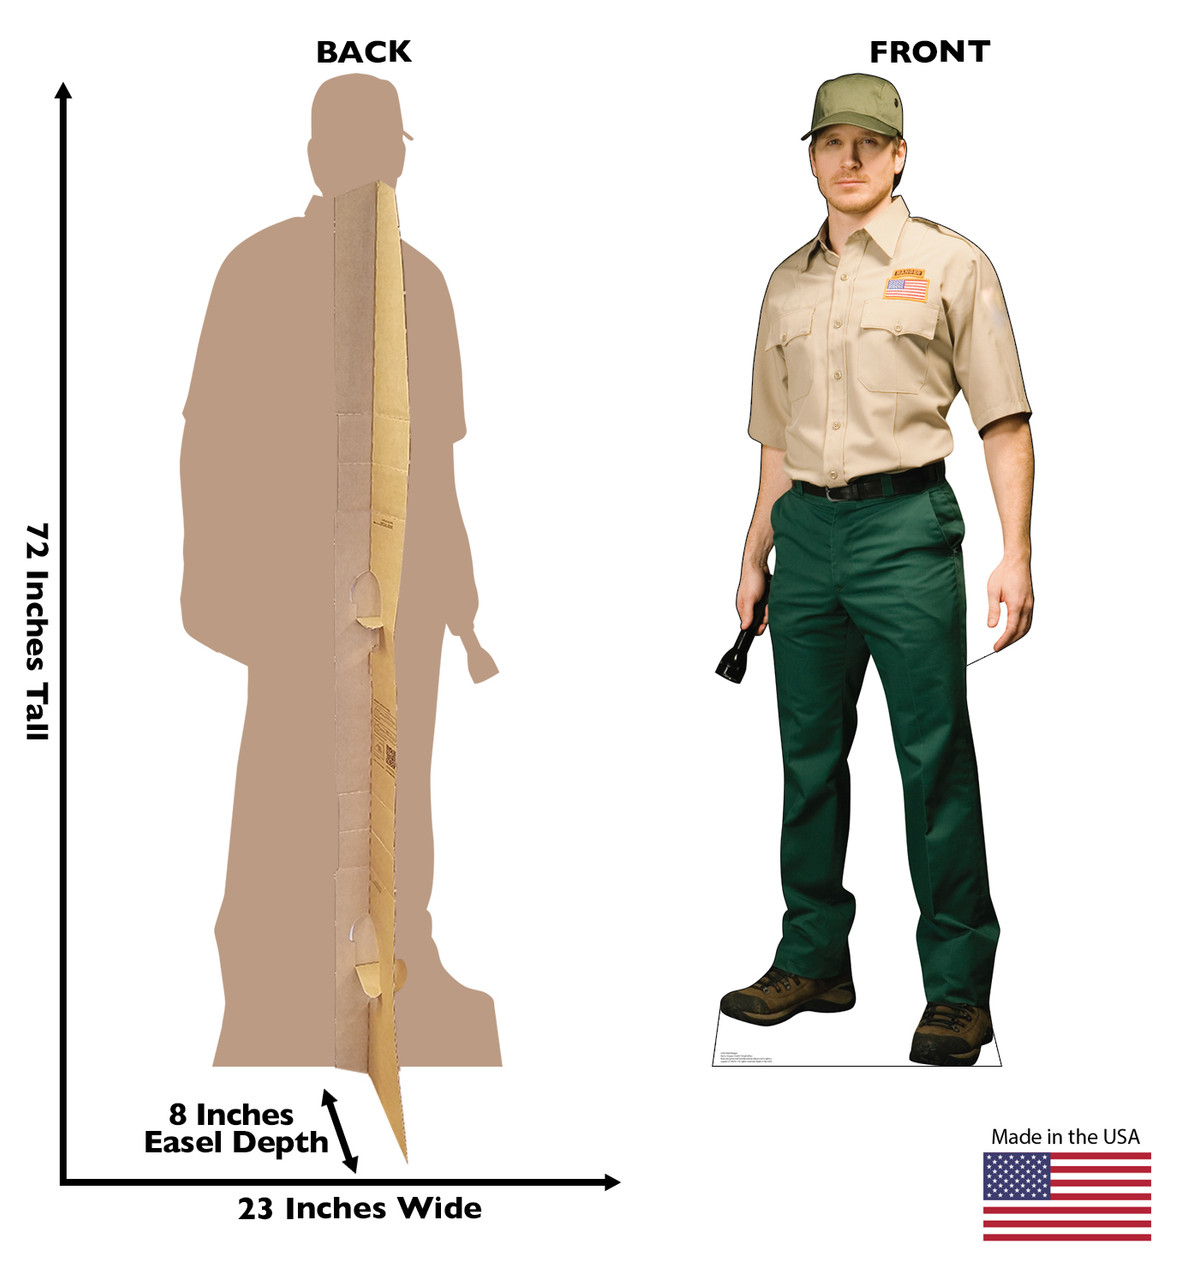 Life-size cardboard standee of a Park Ranger with back and front dimensions.